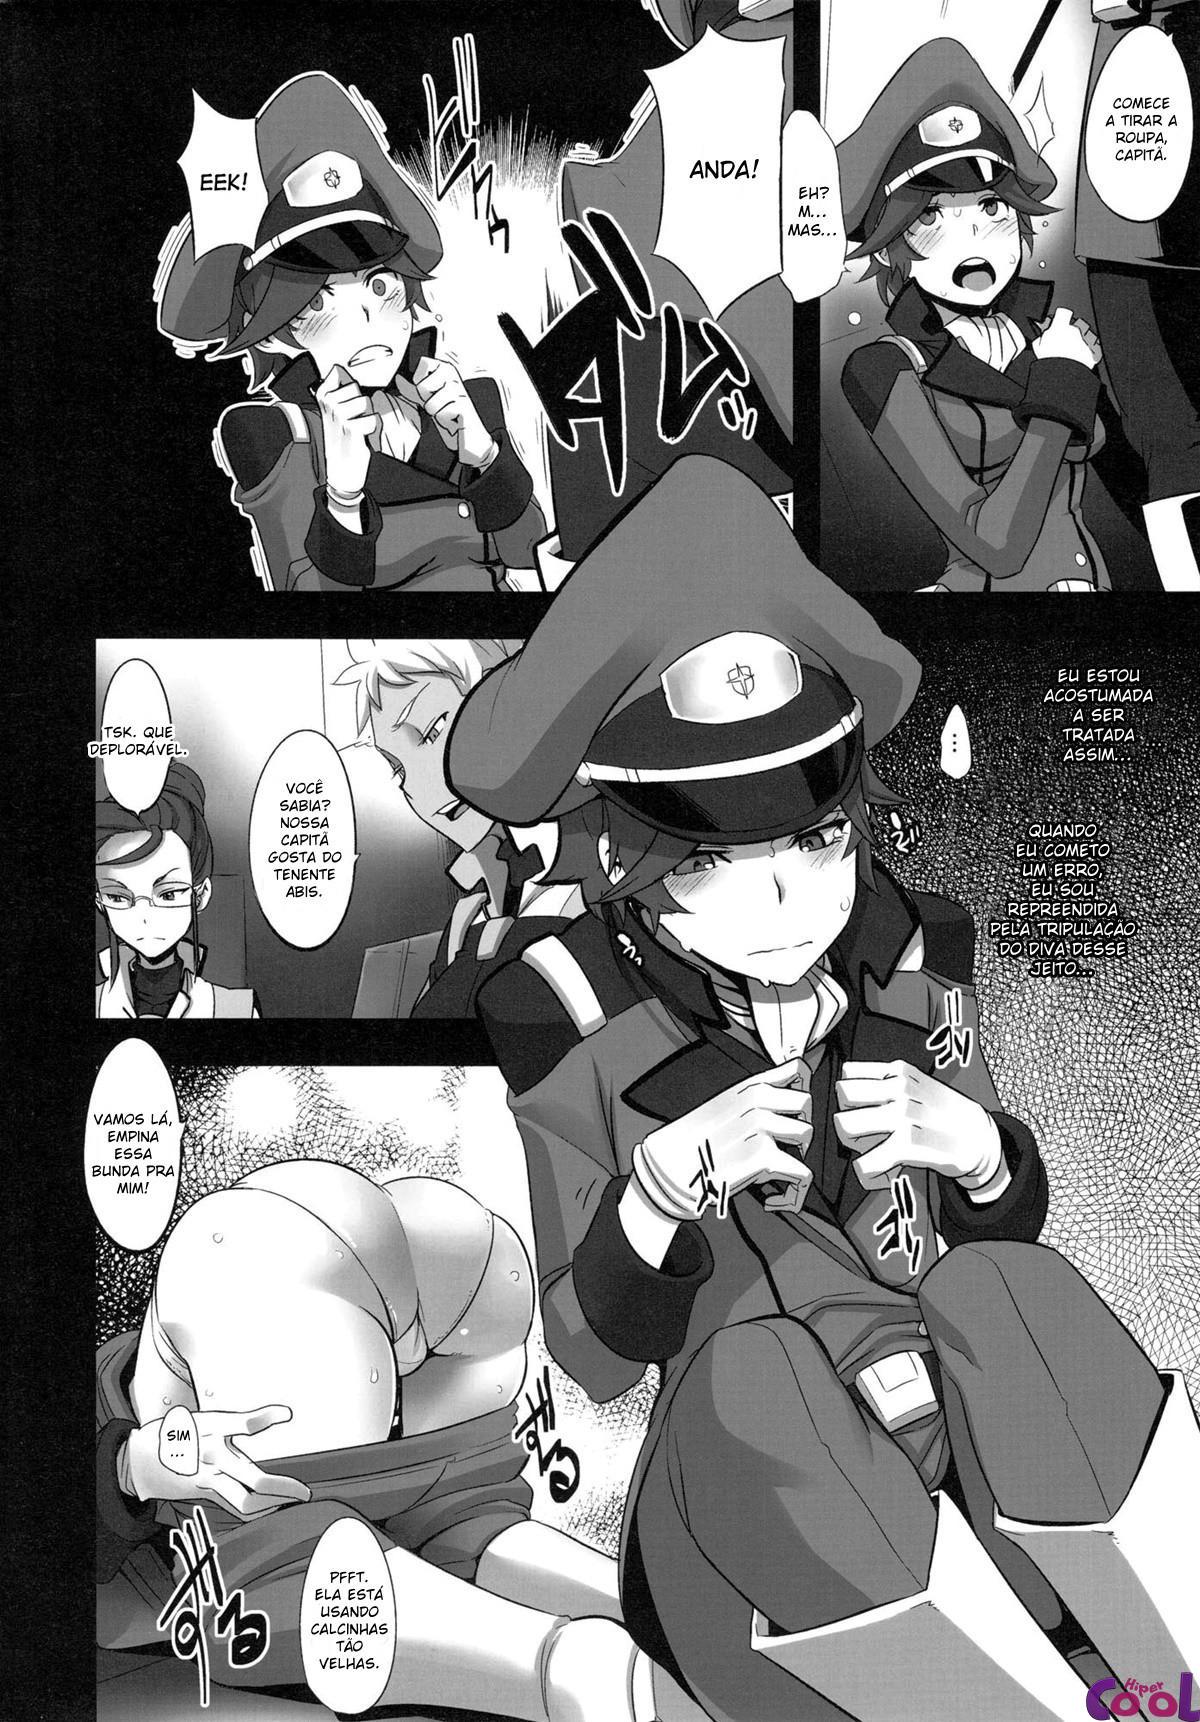 dame-kanchou-or-useless-captain-chapter-01-page-3.jpg